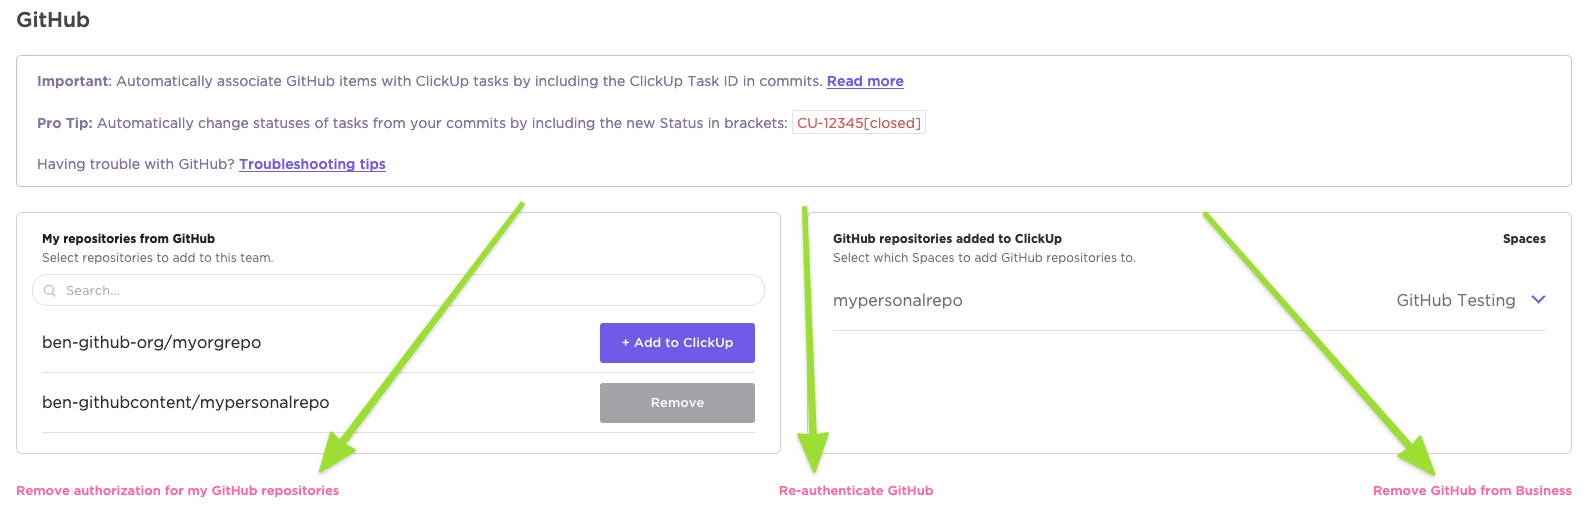 Screenshot highlighting the different options to remove Github authorization, re-authenticate Github, or remove Github within the ClickUp settings.